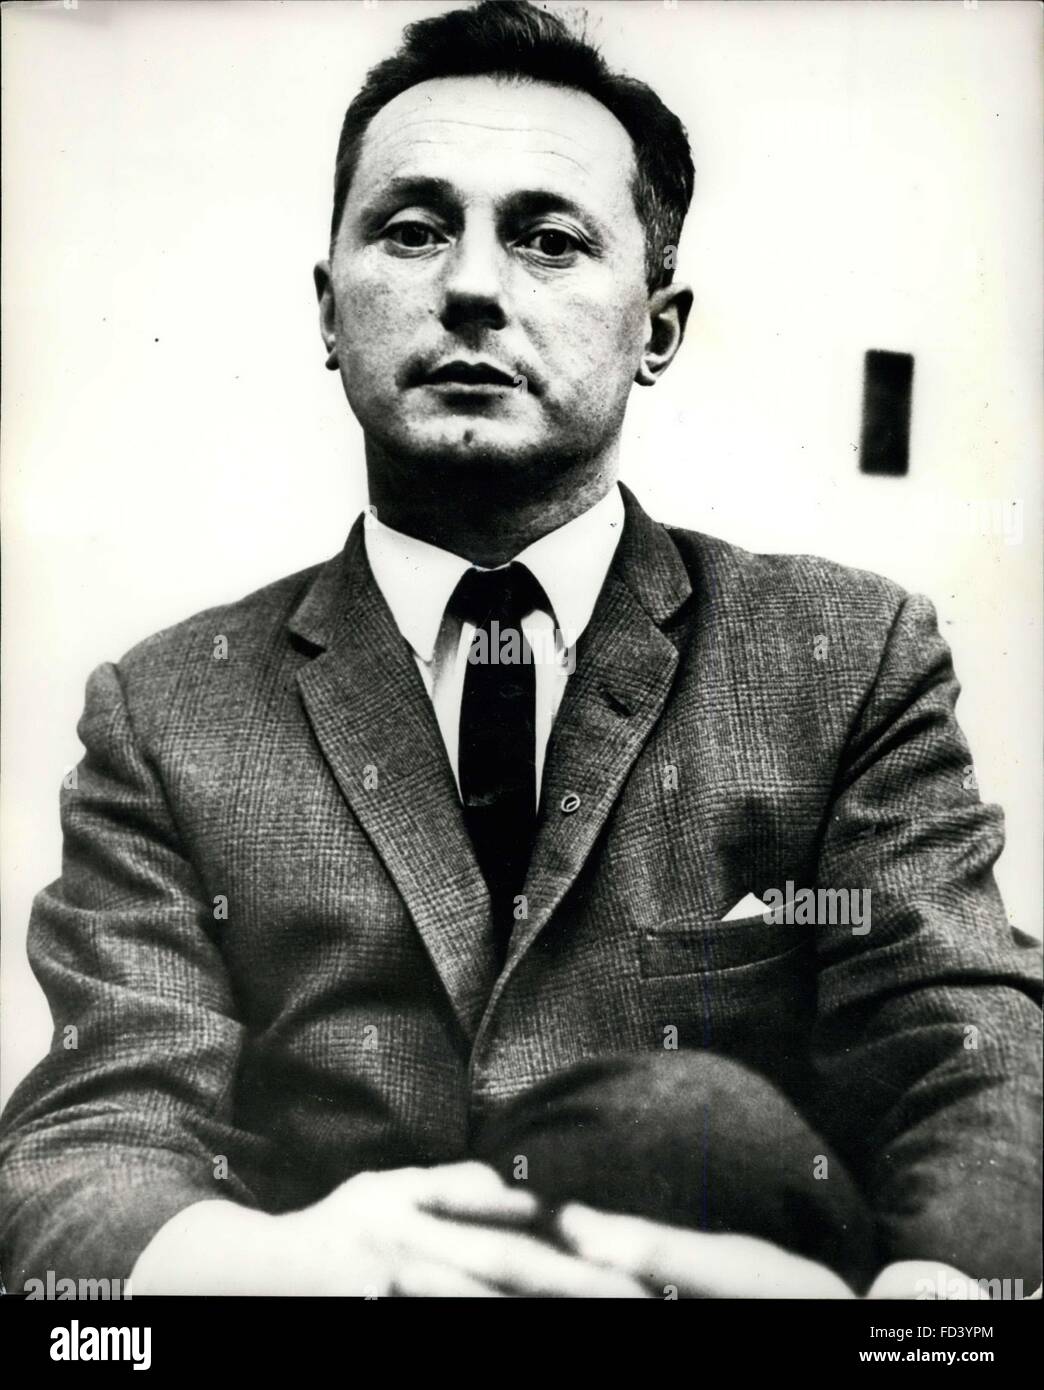 1962 - I.R.A Leader Macstiofain. Sean Macstiofain, the man that is responsible for the continuance of guerrilla warfare, was born John Stephenson in Leyton. London, in 1928, of an English father and Irish mother. Sean MacStiofain is the Gaelic version of his name. © Keystone Pictures USA/ZUMAPRESS.com/Alamy Live News Stock Photo